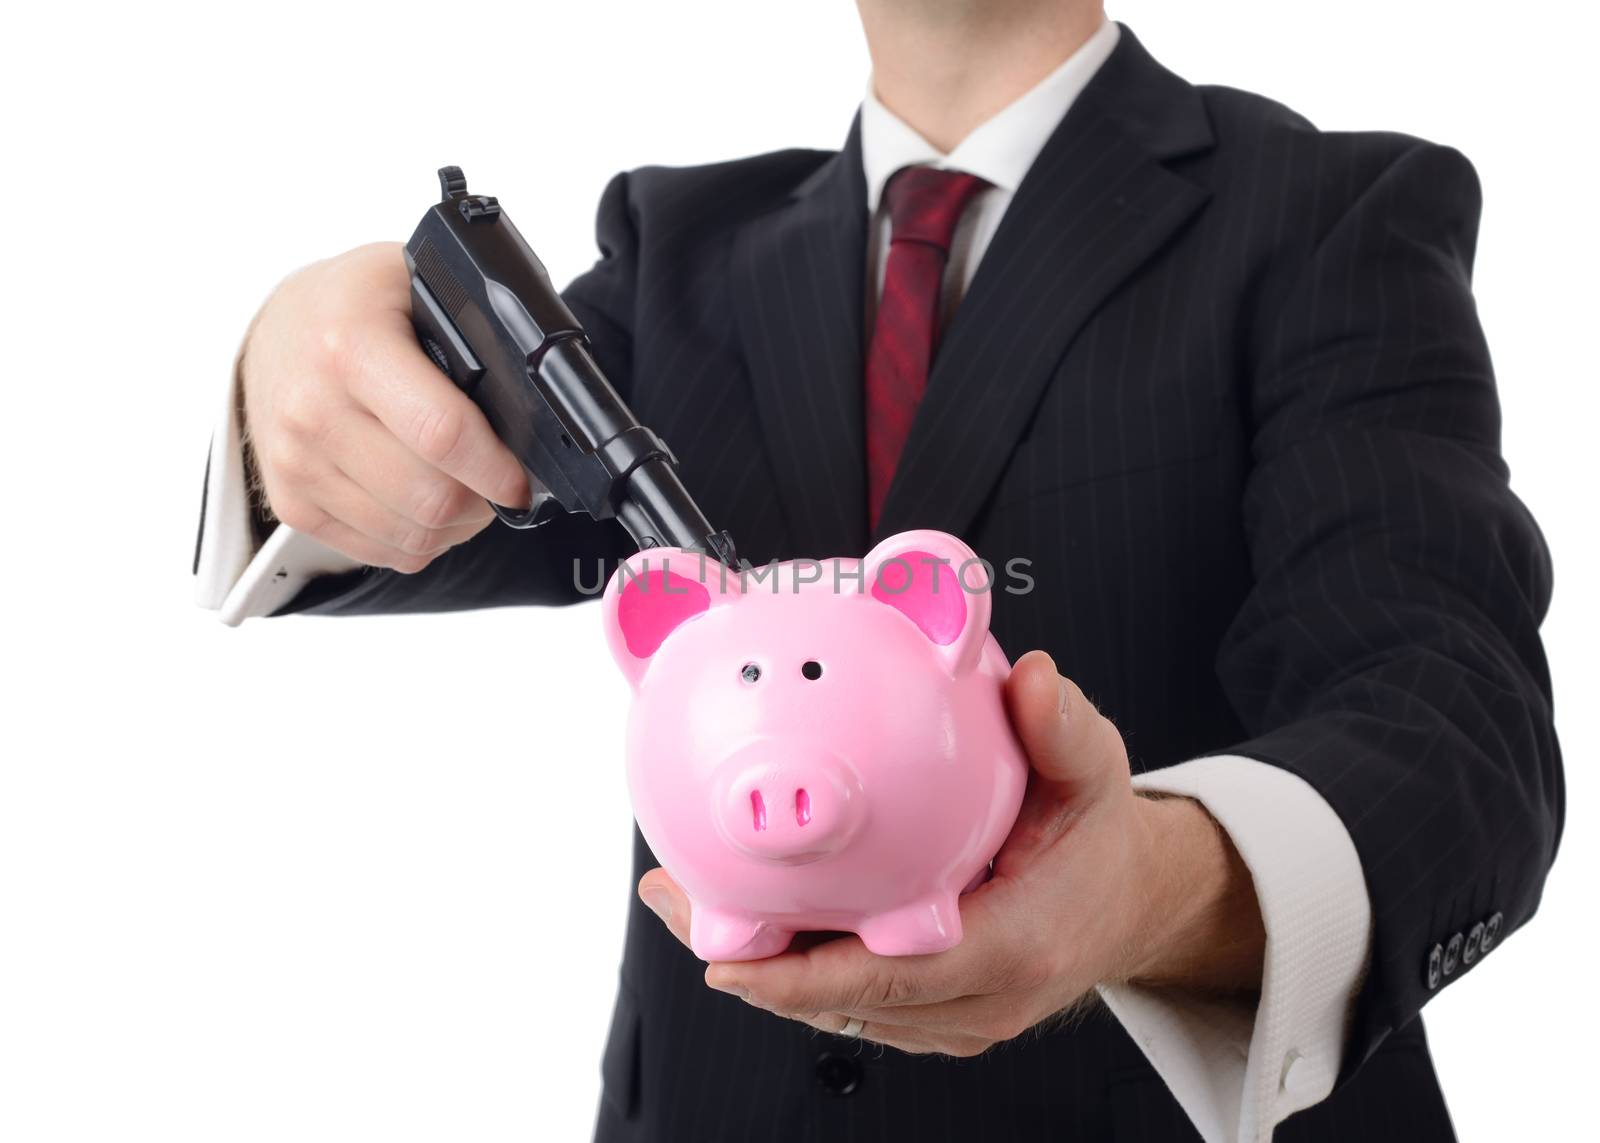 buisnessman holding bank to ransum with a gun isolated on a white background